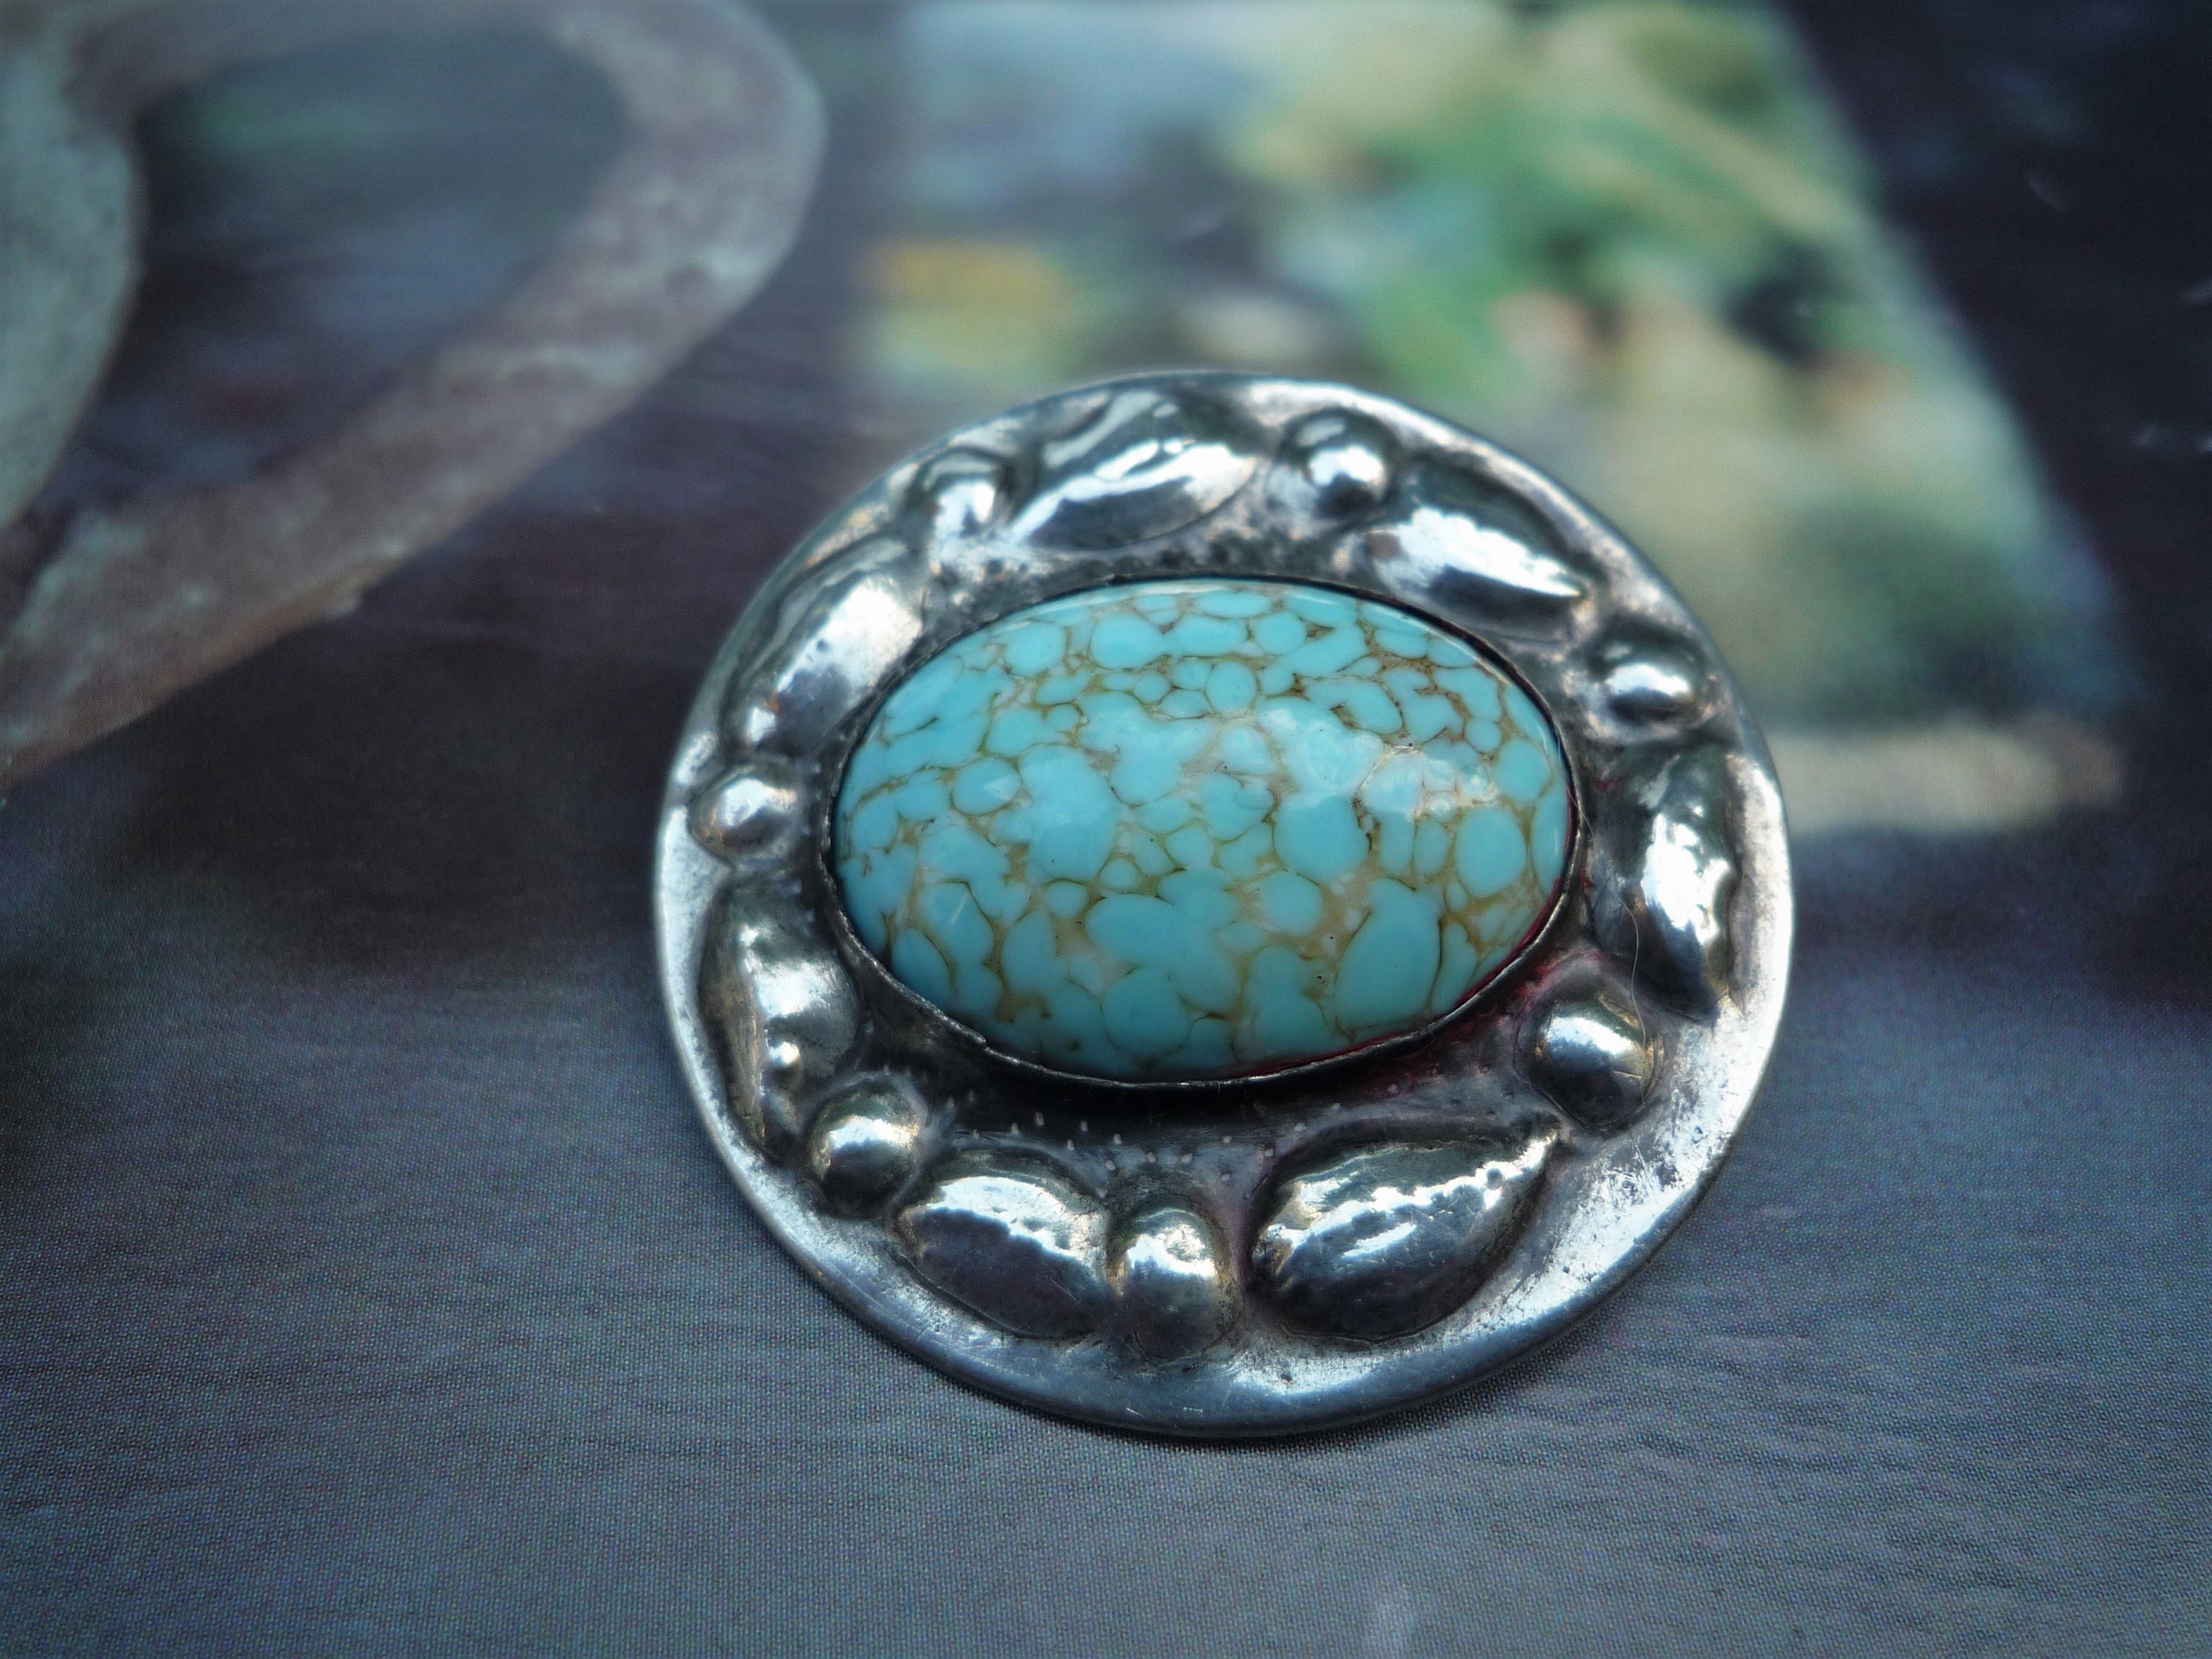 Arts and Crafts Brooch with Turquoise Cabochon, Hammered Pewter Set